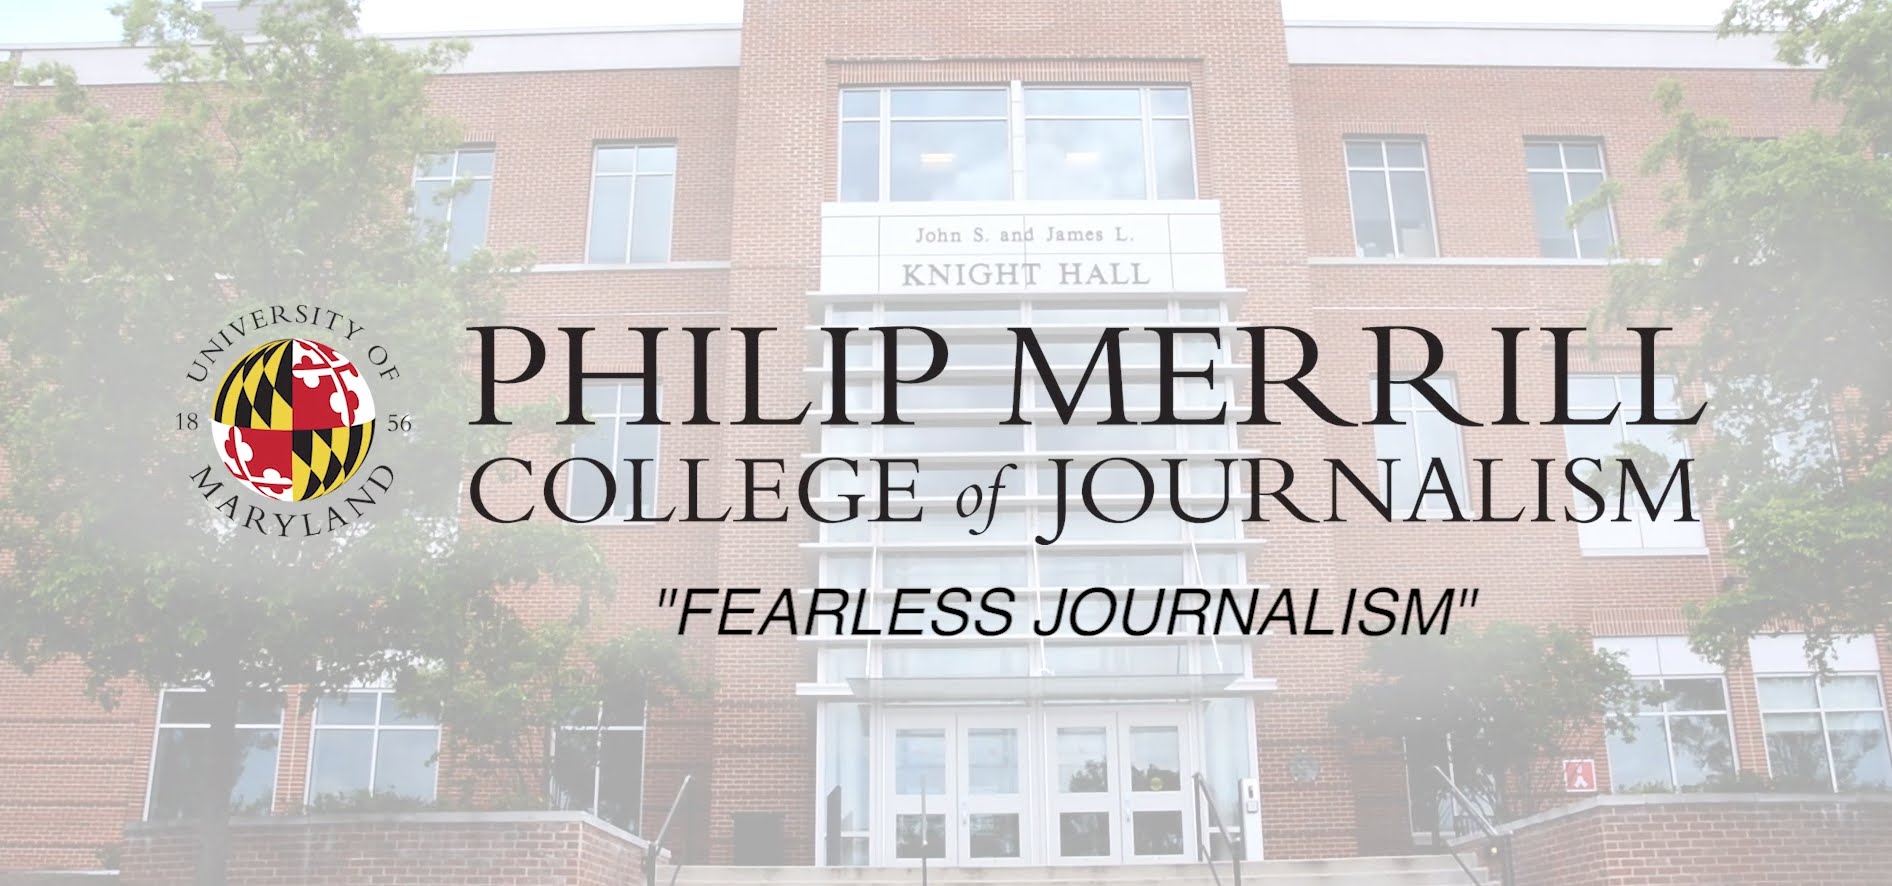 A photo of the the Philip Merrill College of Journalism's advertisement which was aired on television.